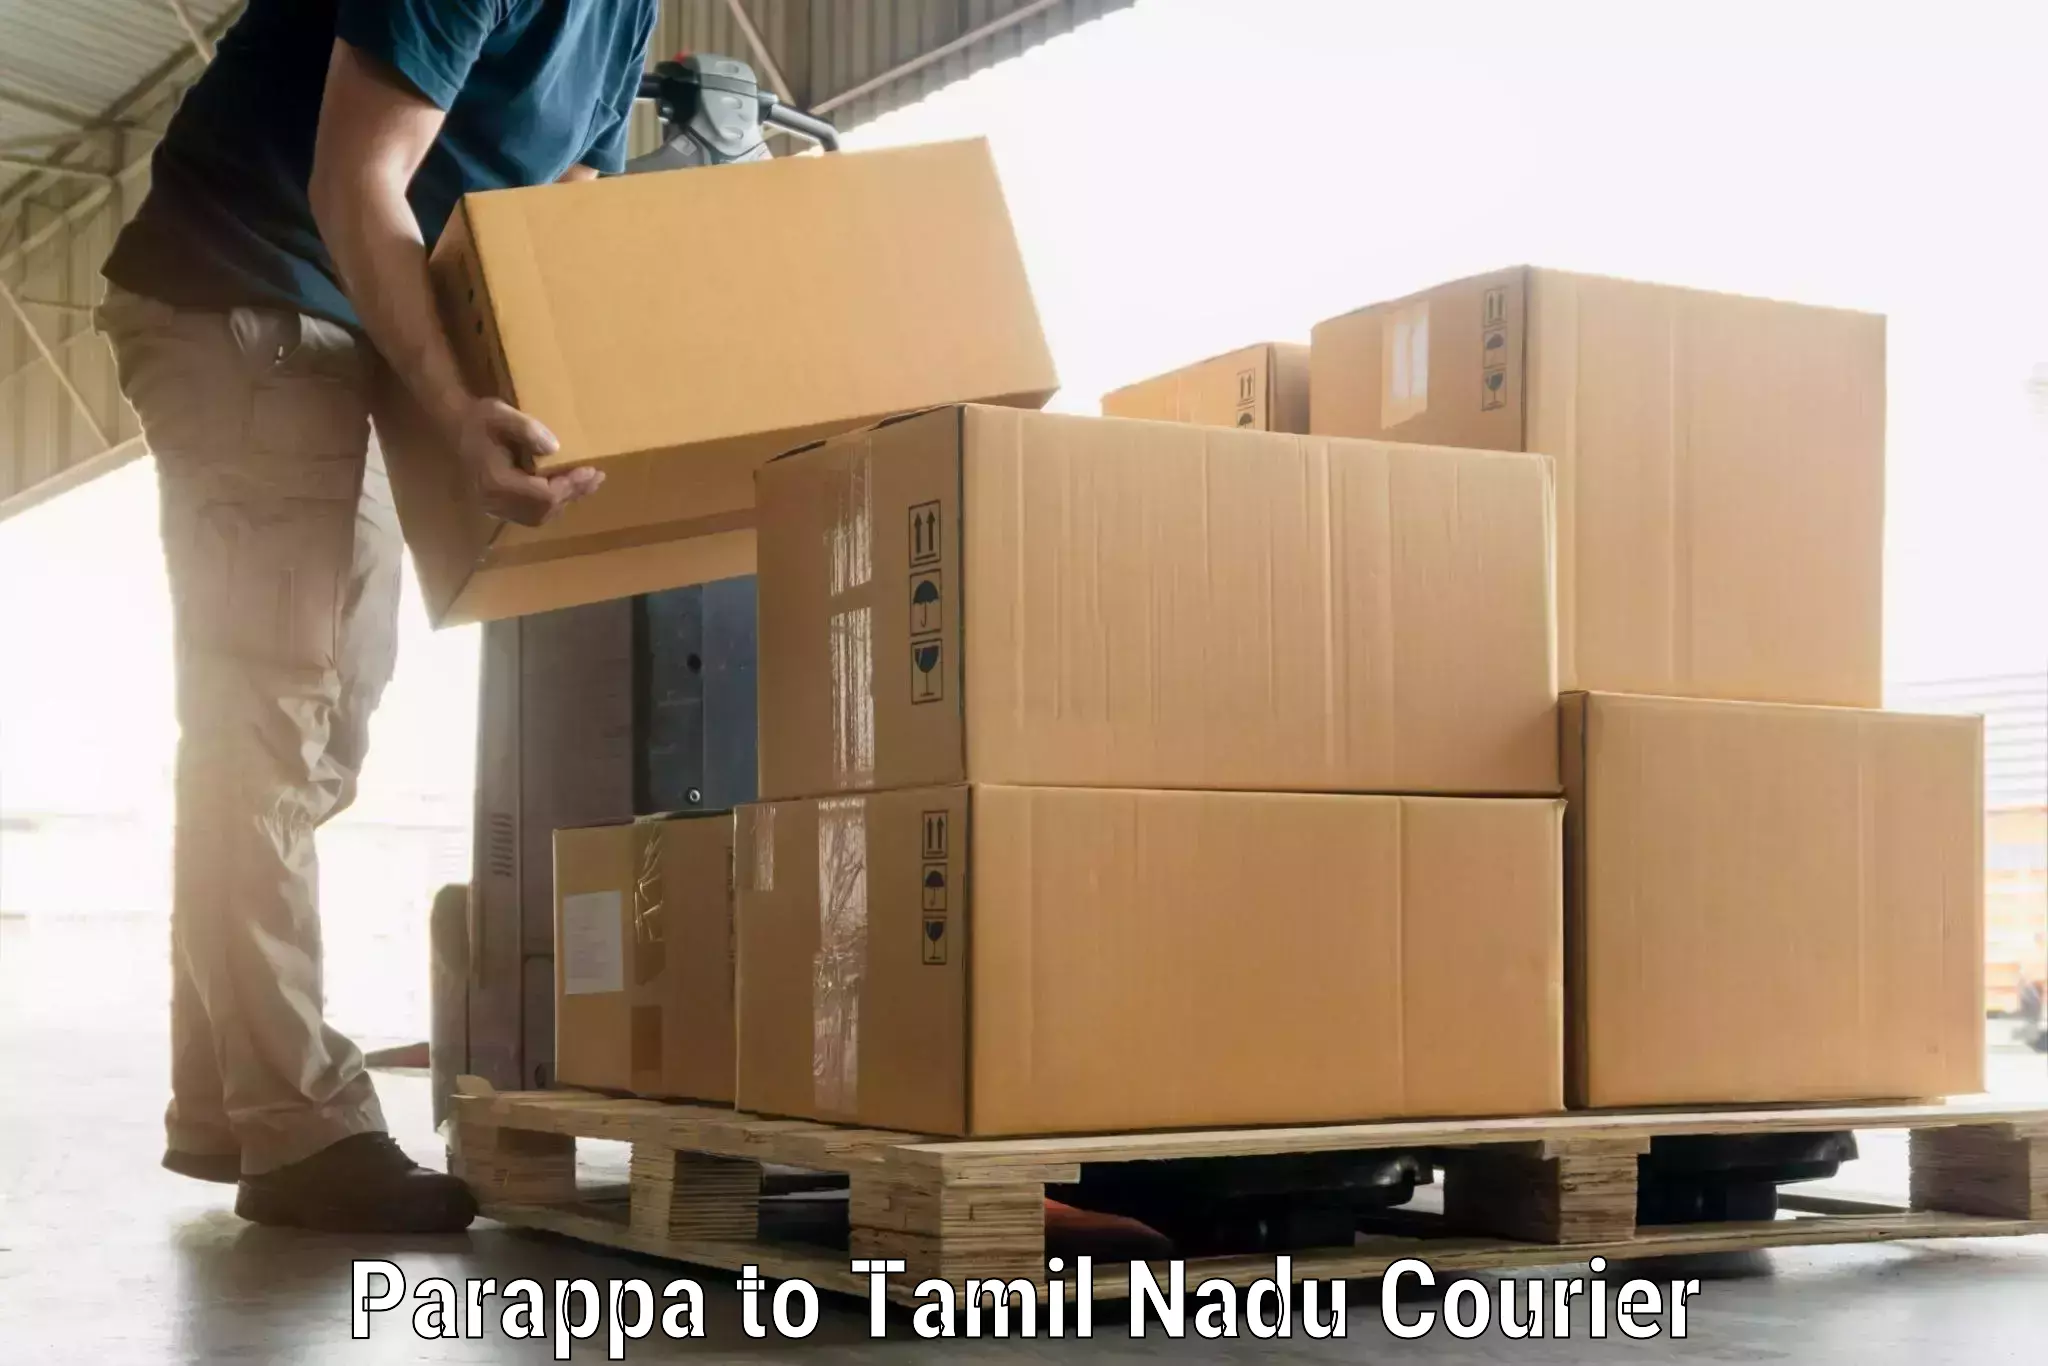 Domestic luggage transport Parappa to Ennore Port Chennai